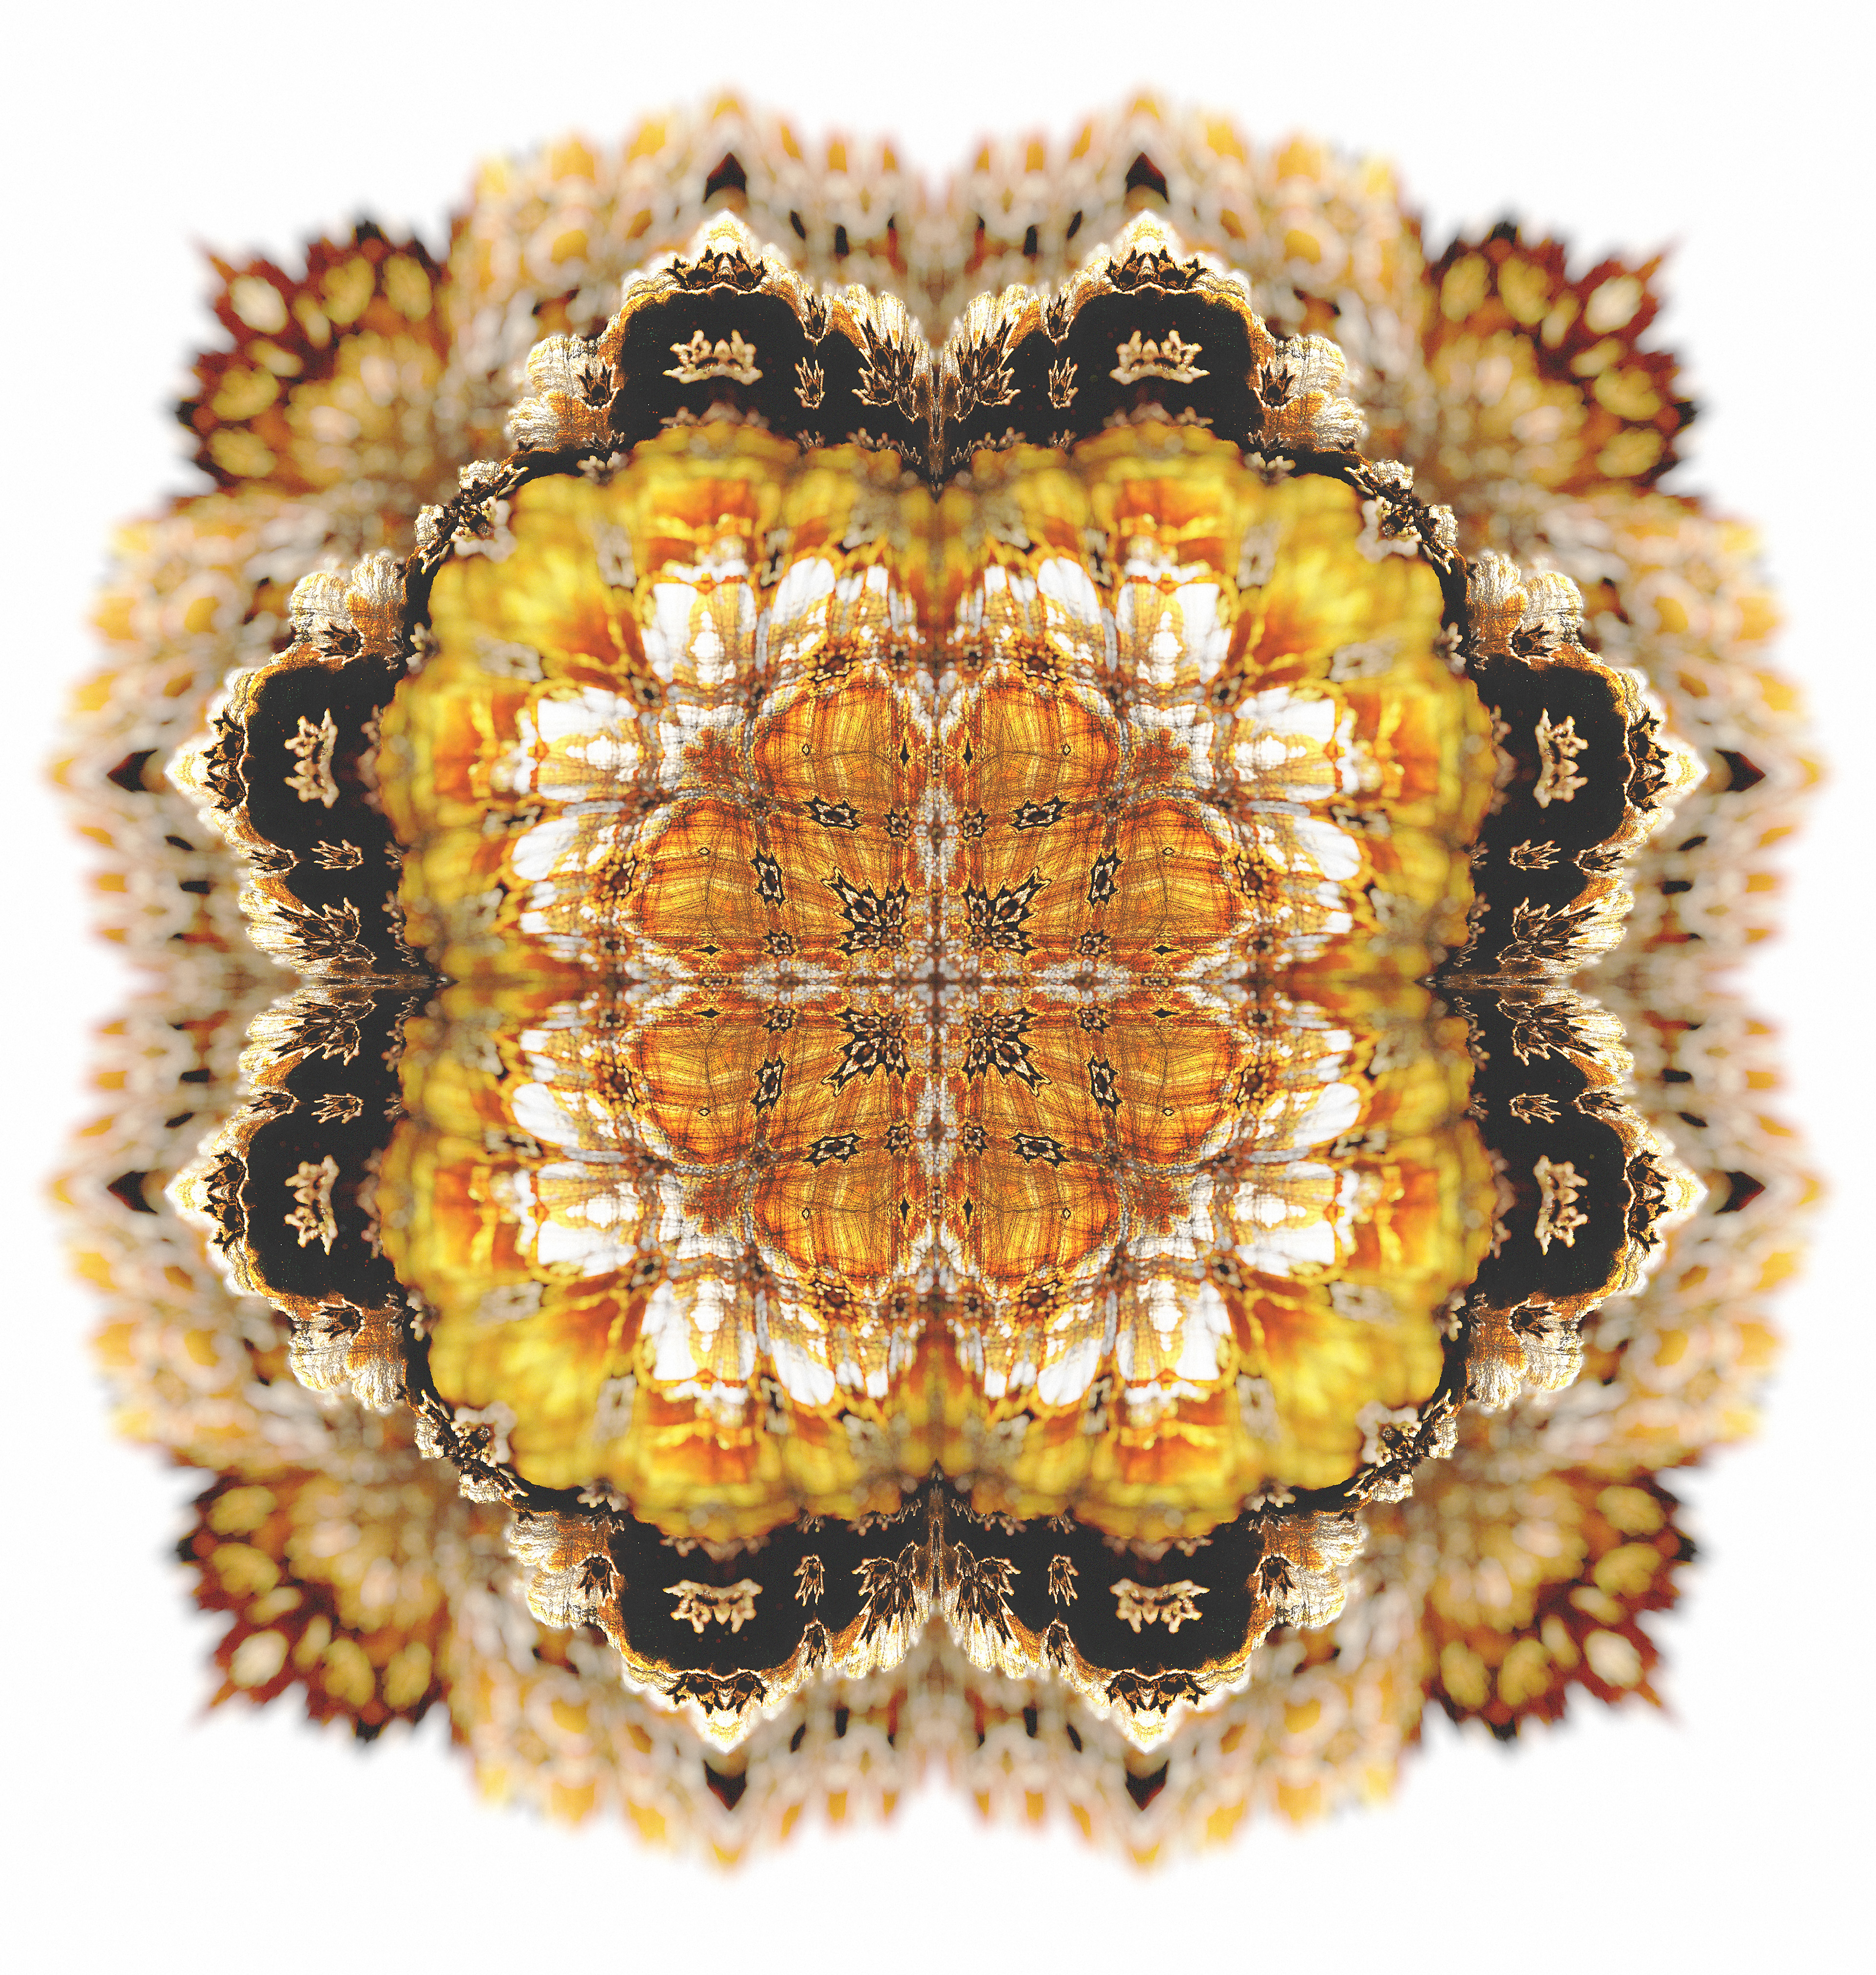 Abstract art resembling a bright yellow flower with black accents